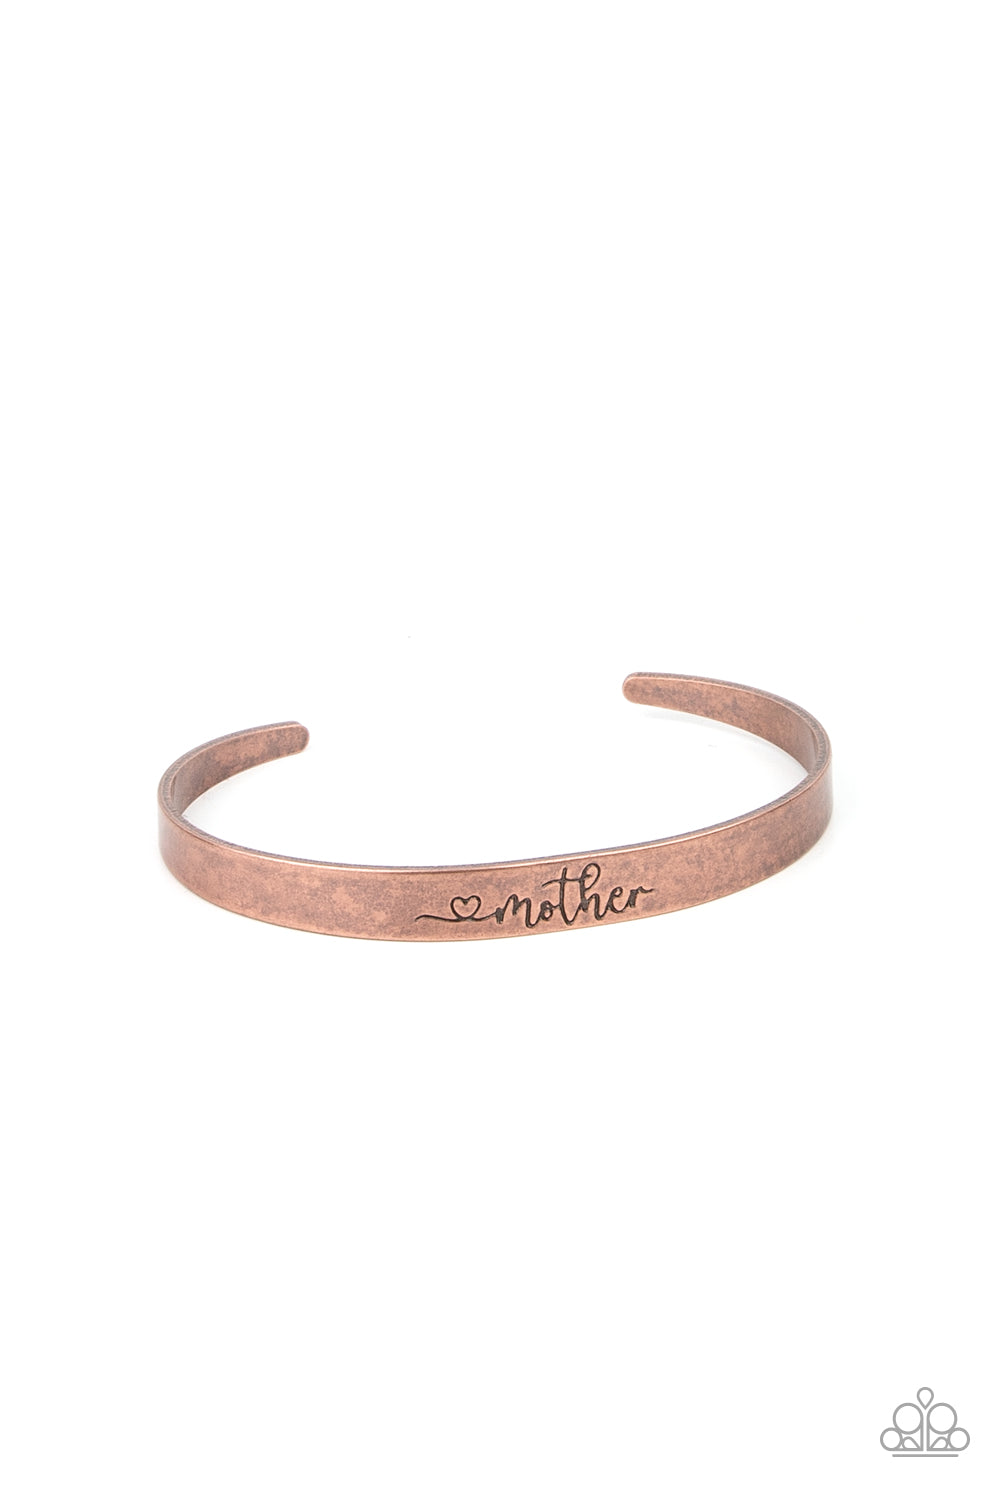 Sweetly Named - Copper "Mother" Paparazzi Cuff Bracelet